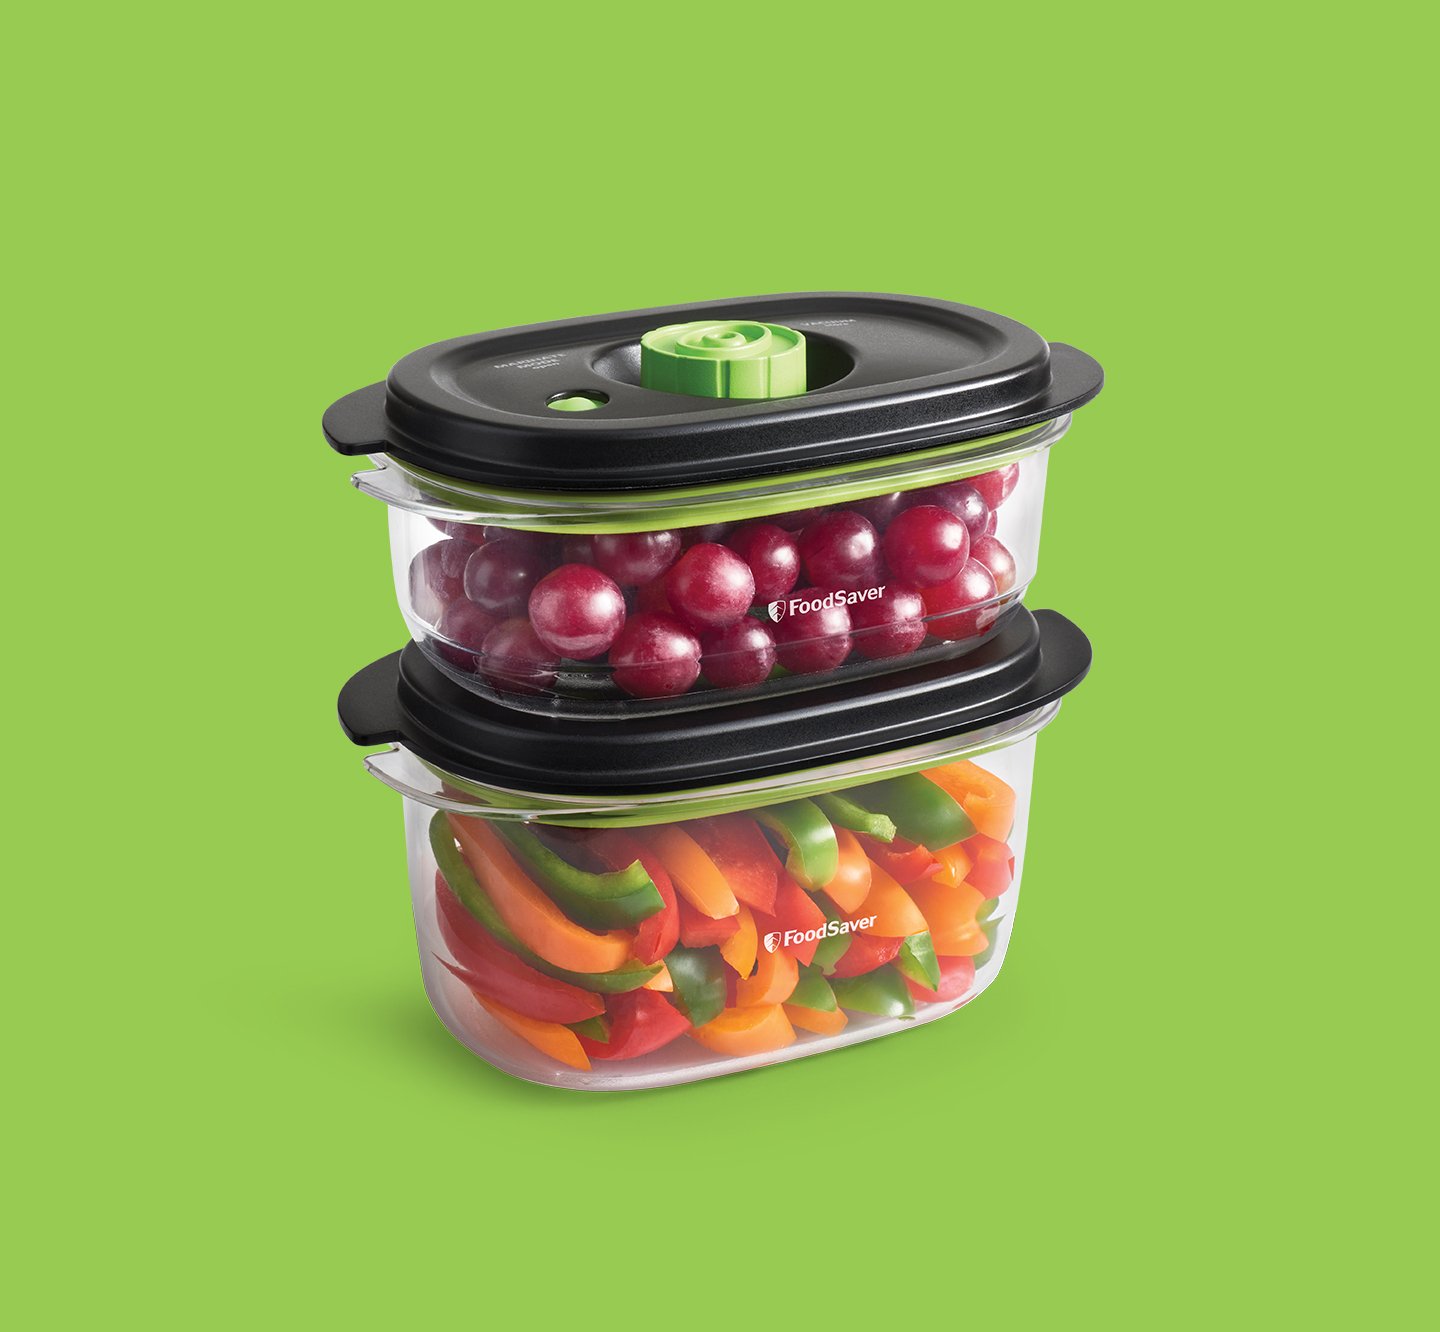 https://newellbrands.scene7.com/is/image/NewellRubbermaid/Foodsaver_Appliance_Consumer_Journey_NWL_Image_with_Text_C7_Containers?fmt=jpeg